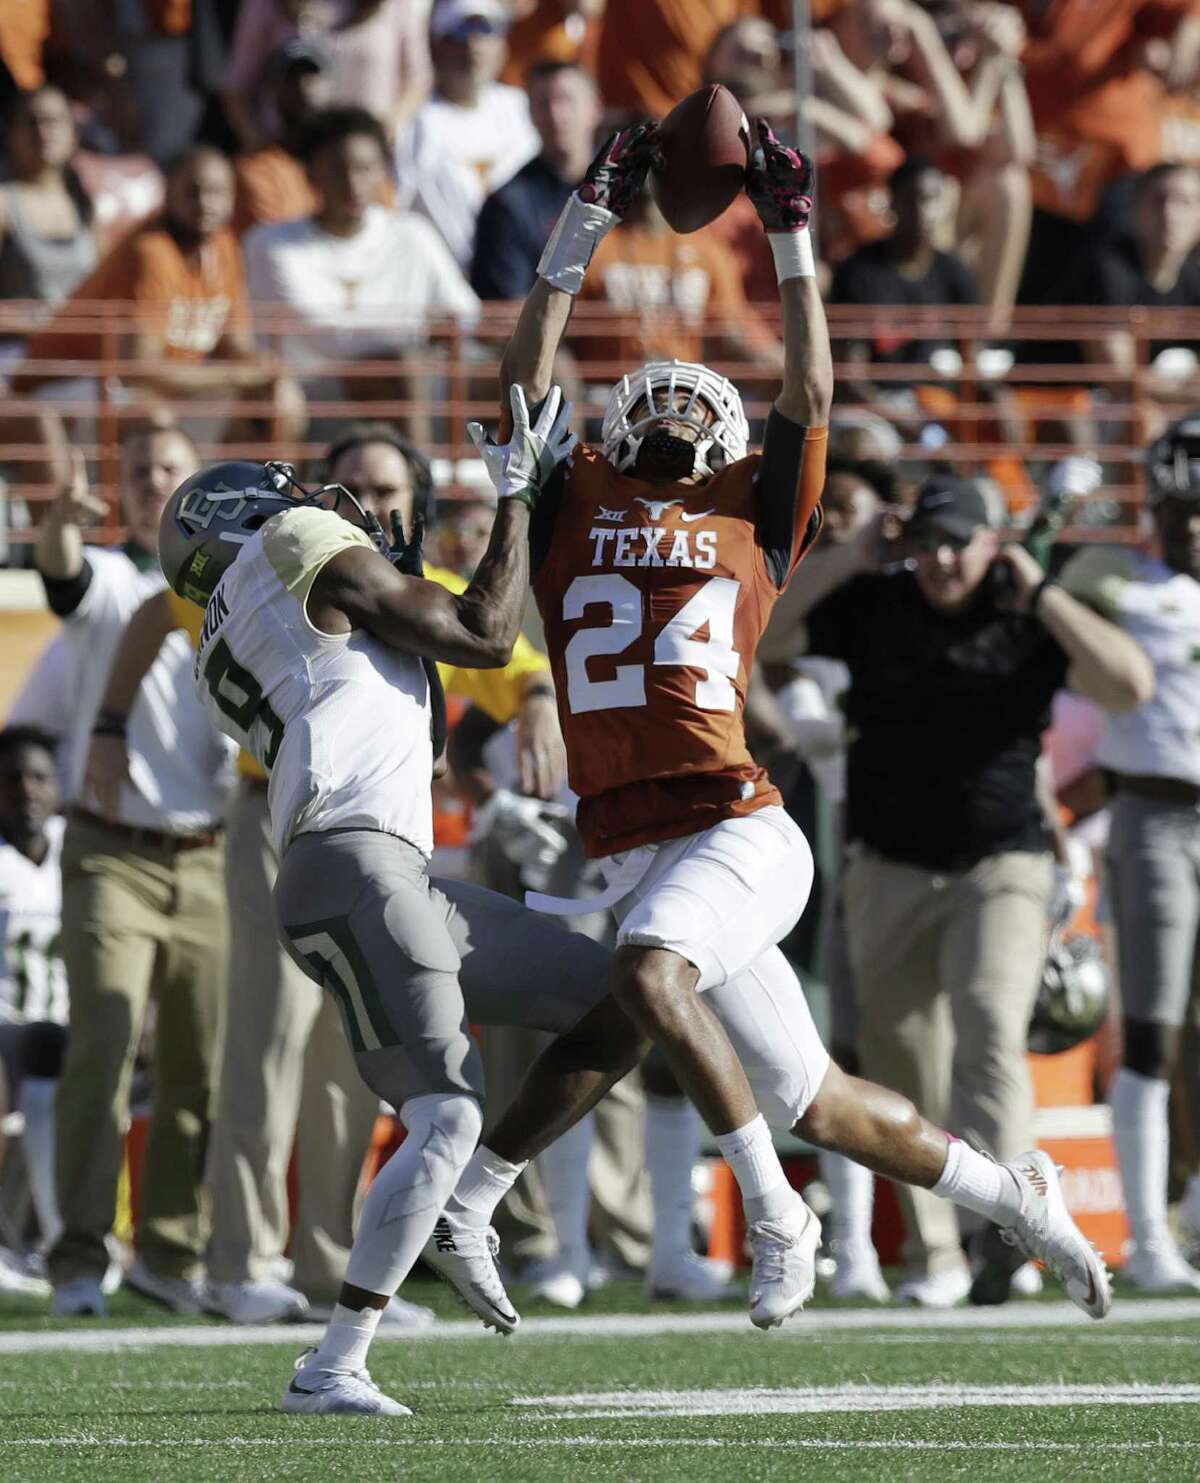 Texas cornerback John Bonney (24) breaks up a pass intended for Baylor wide receiver KD Cannon (9) during the first half on Oct. 29, 2016, in Austin.